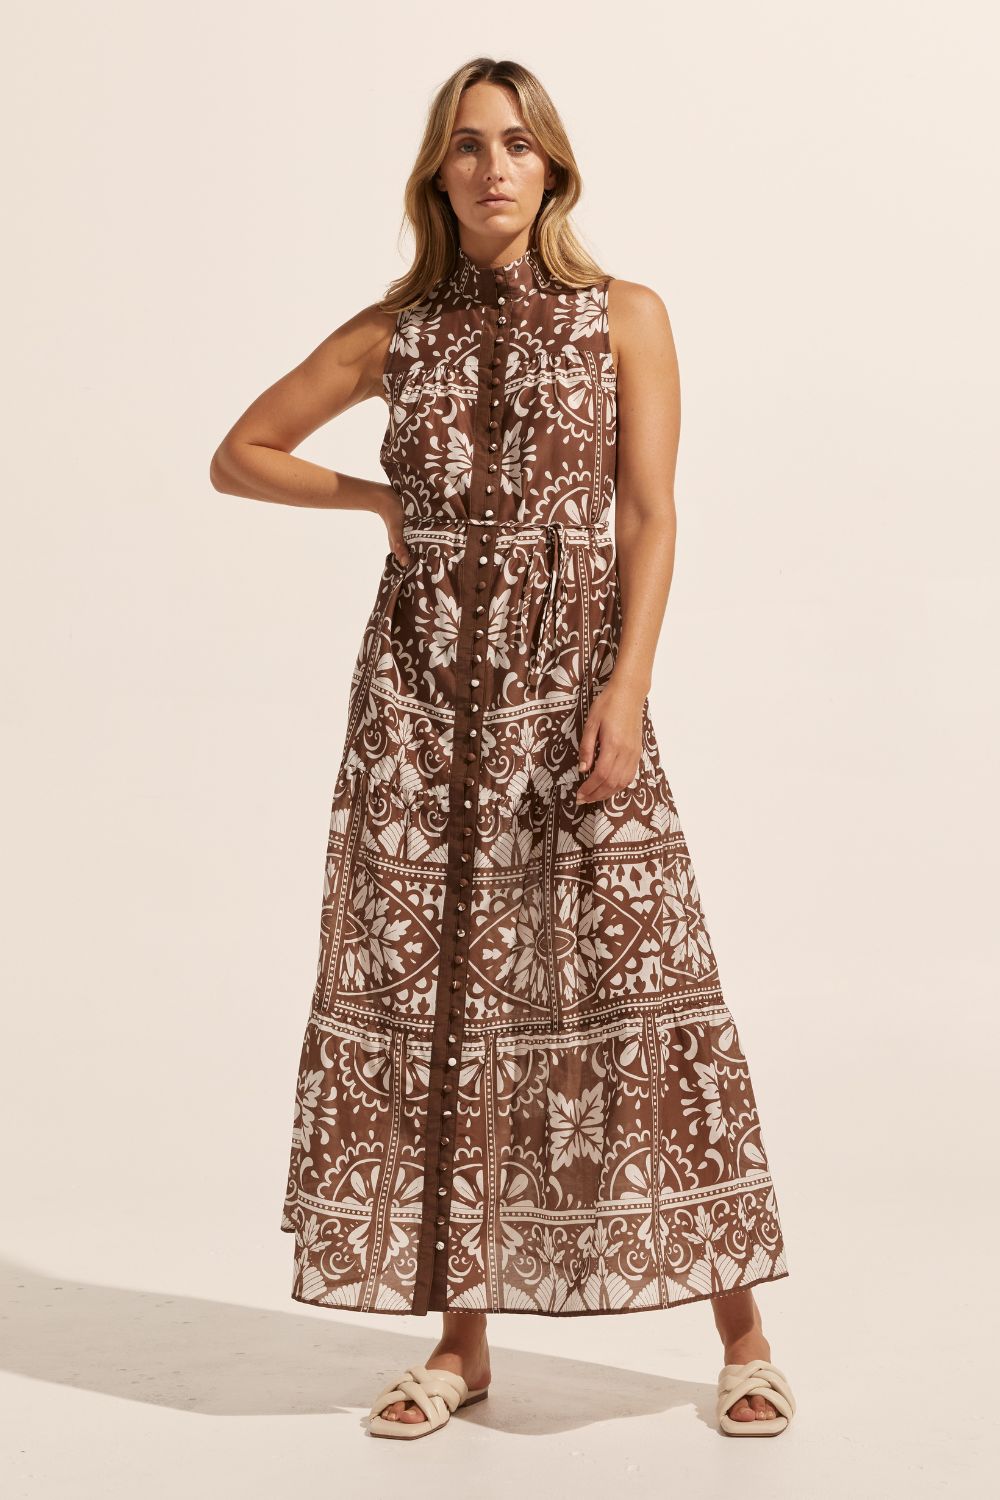 brown and white print, high neck, buttons down centre, thin fabric belt, sleeveless, dress, front view